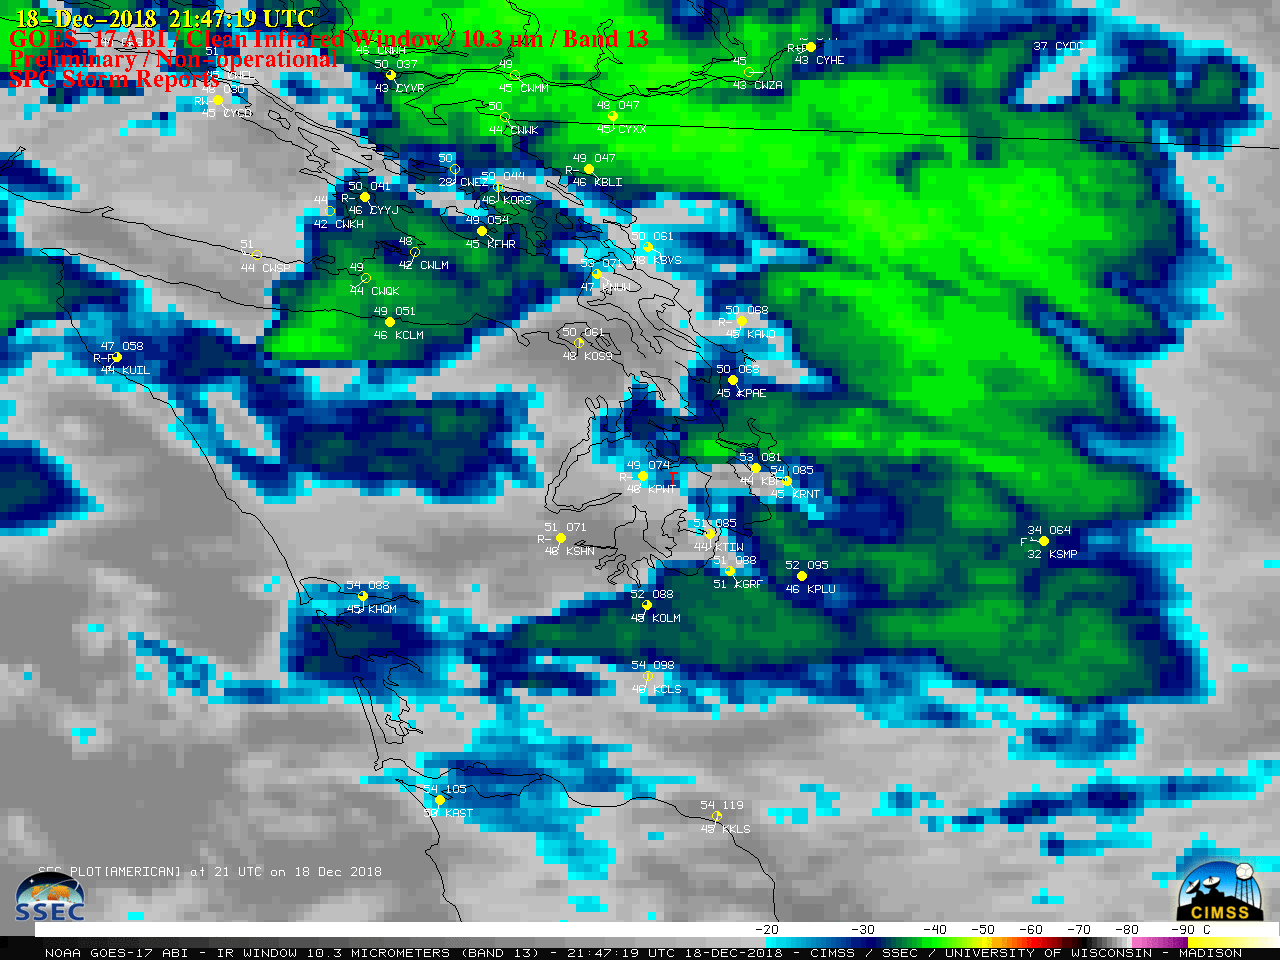 GOES-17 "Clean" Infrared Window (10.3 µm) images, with plots of hourly surface reports and SPC storm reports [click to play animation | MP4]